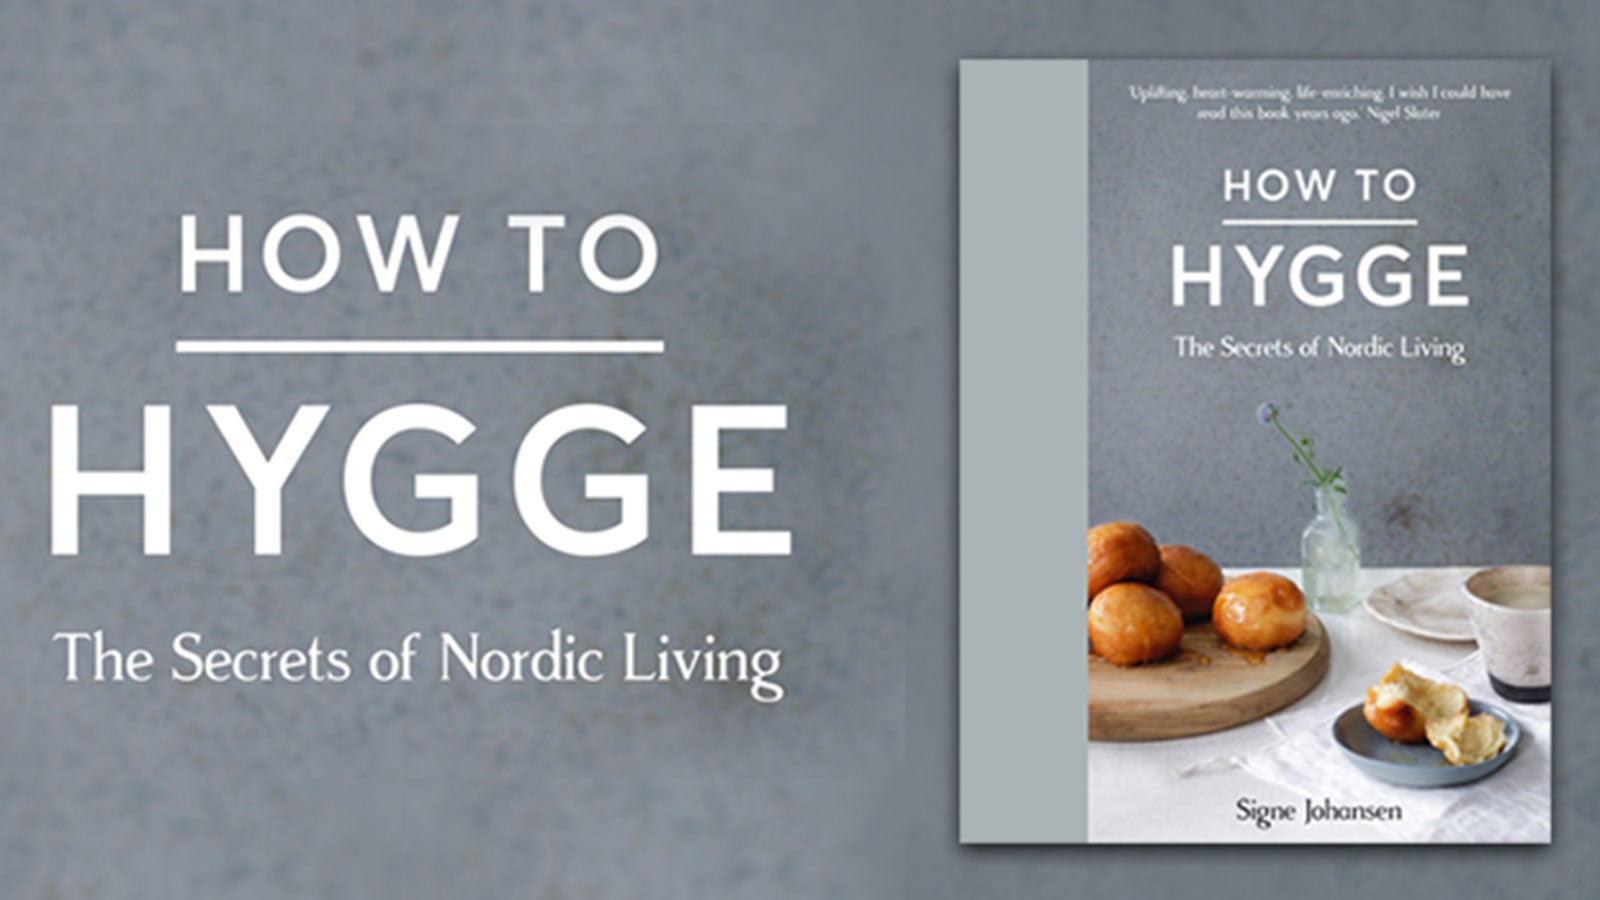 How to Hygge book cover